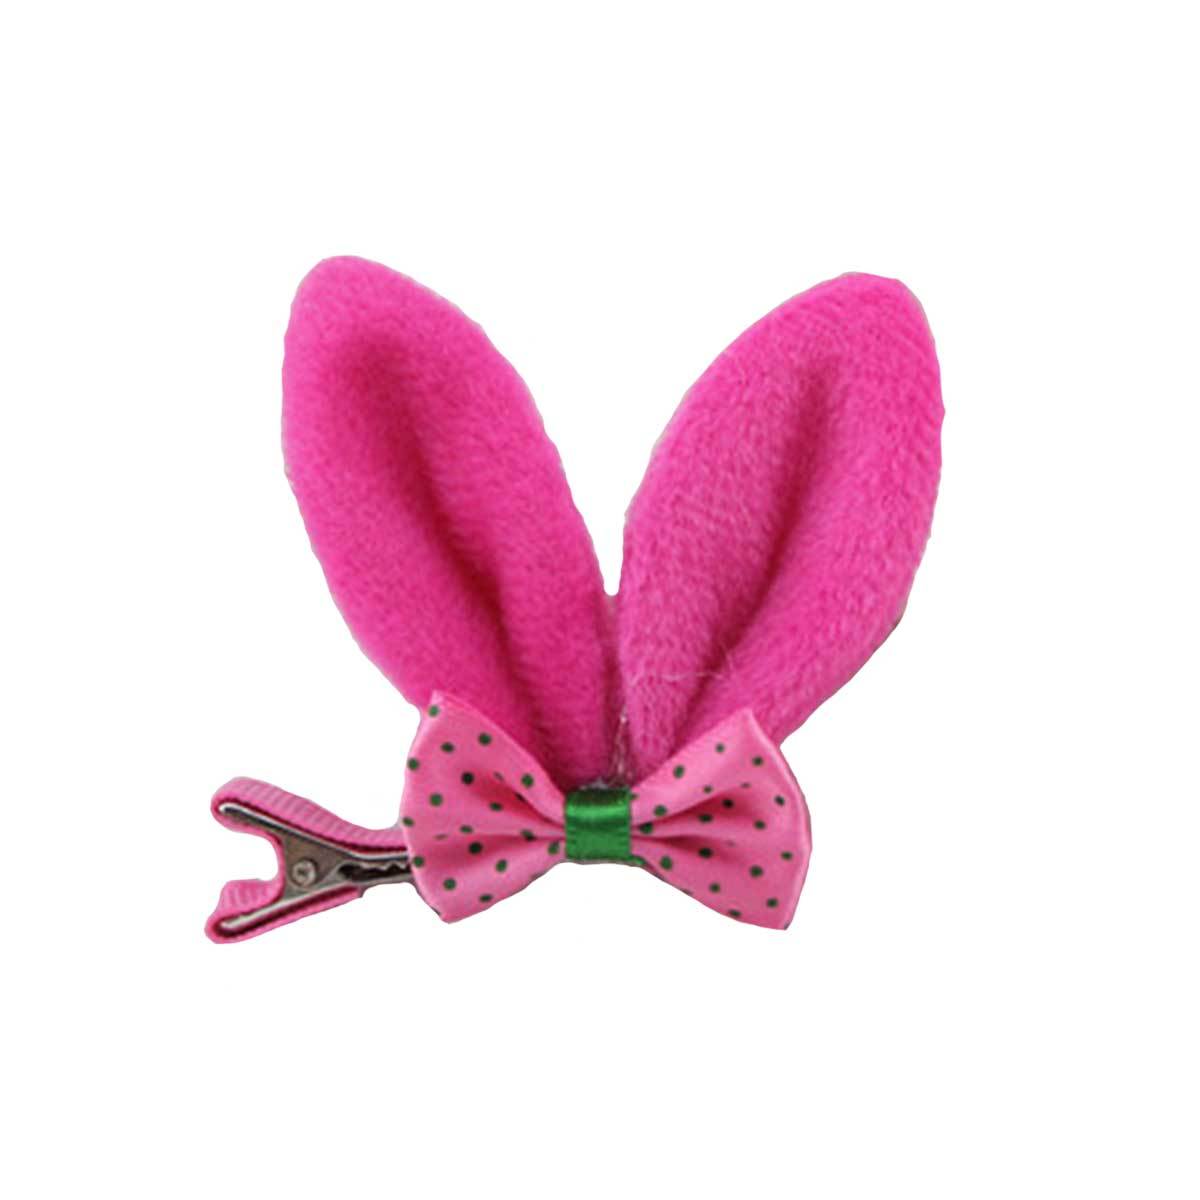 Bunny Ear Clip-On in Bright Pink | Pawlicious & Company